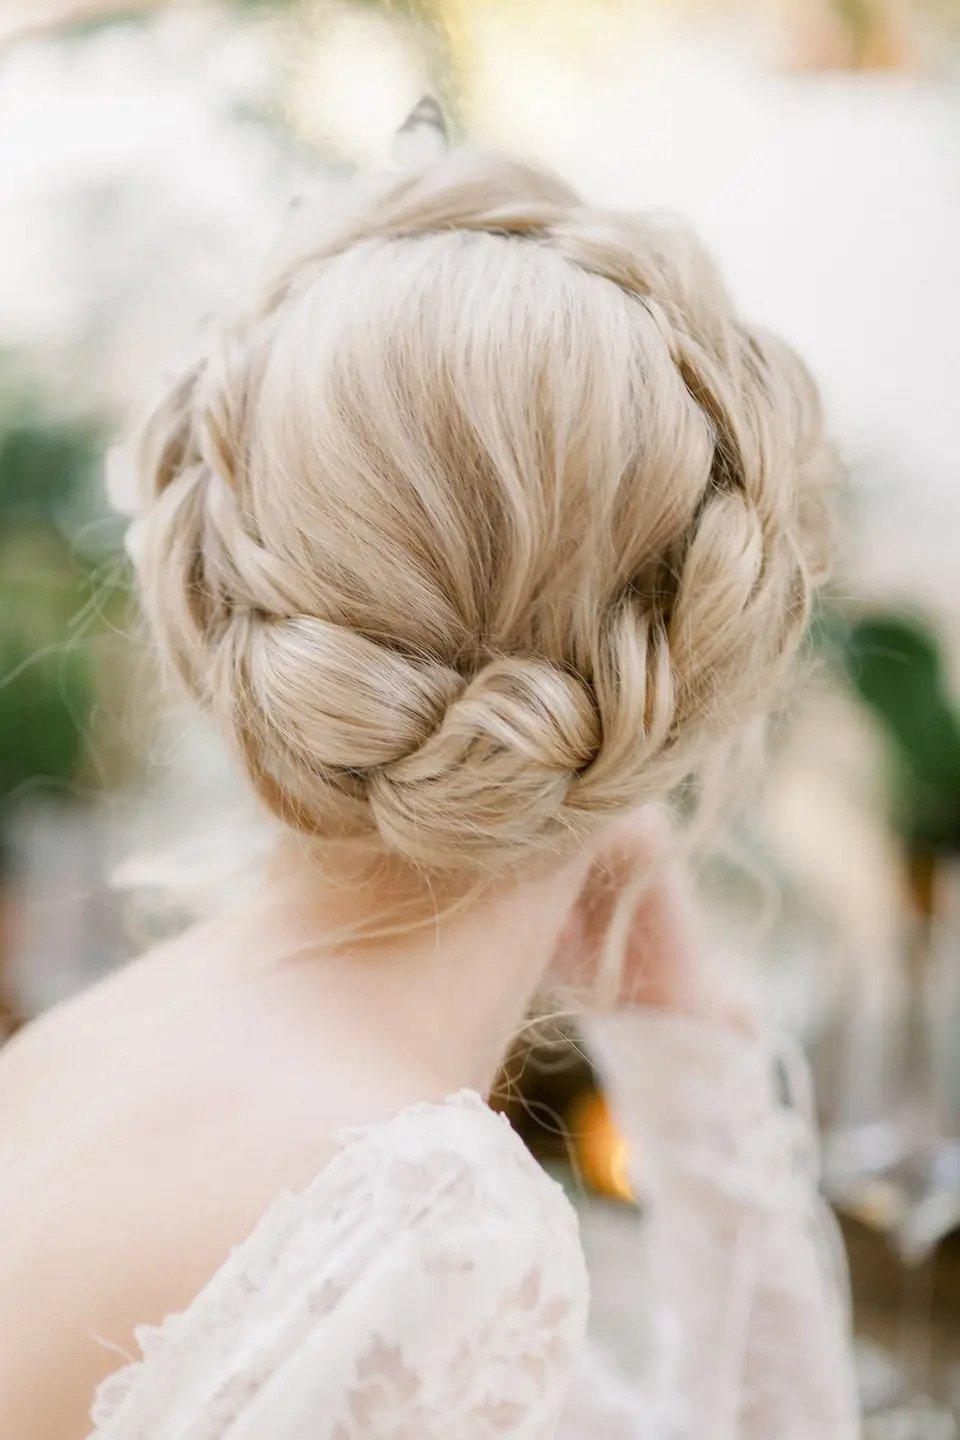 15 Fab Bridal Hairstyles That Take 5 Minutes or Less - Brit + Co